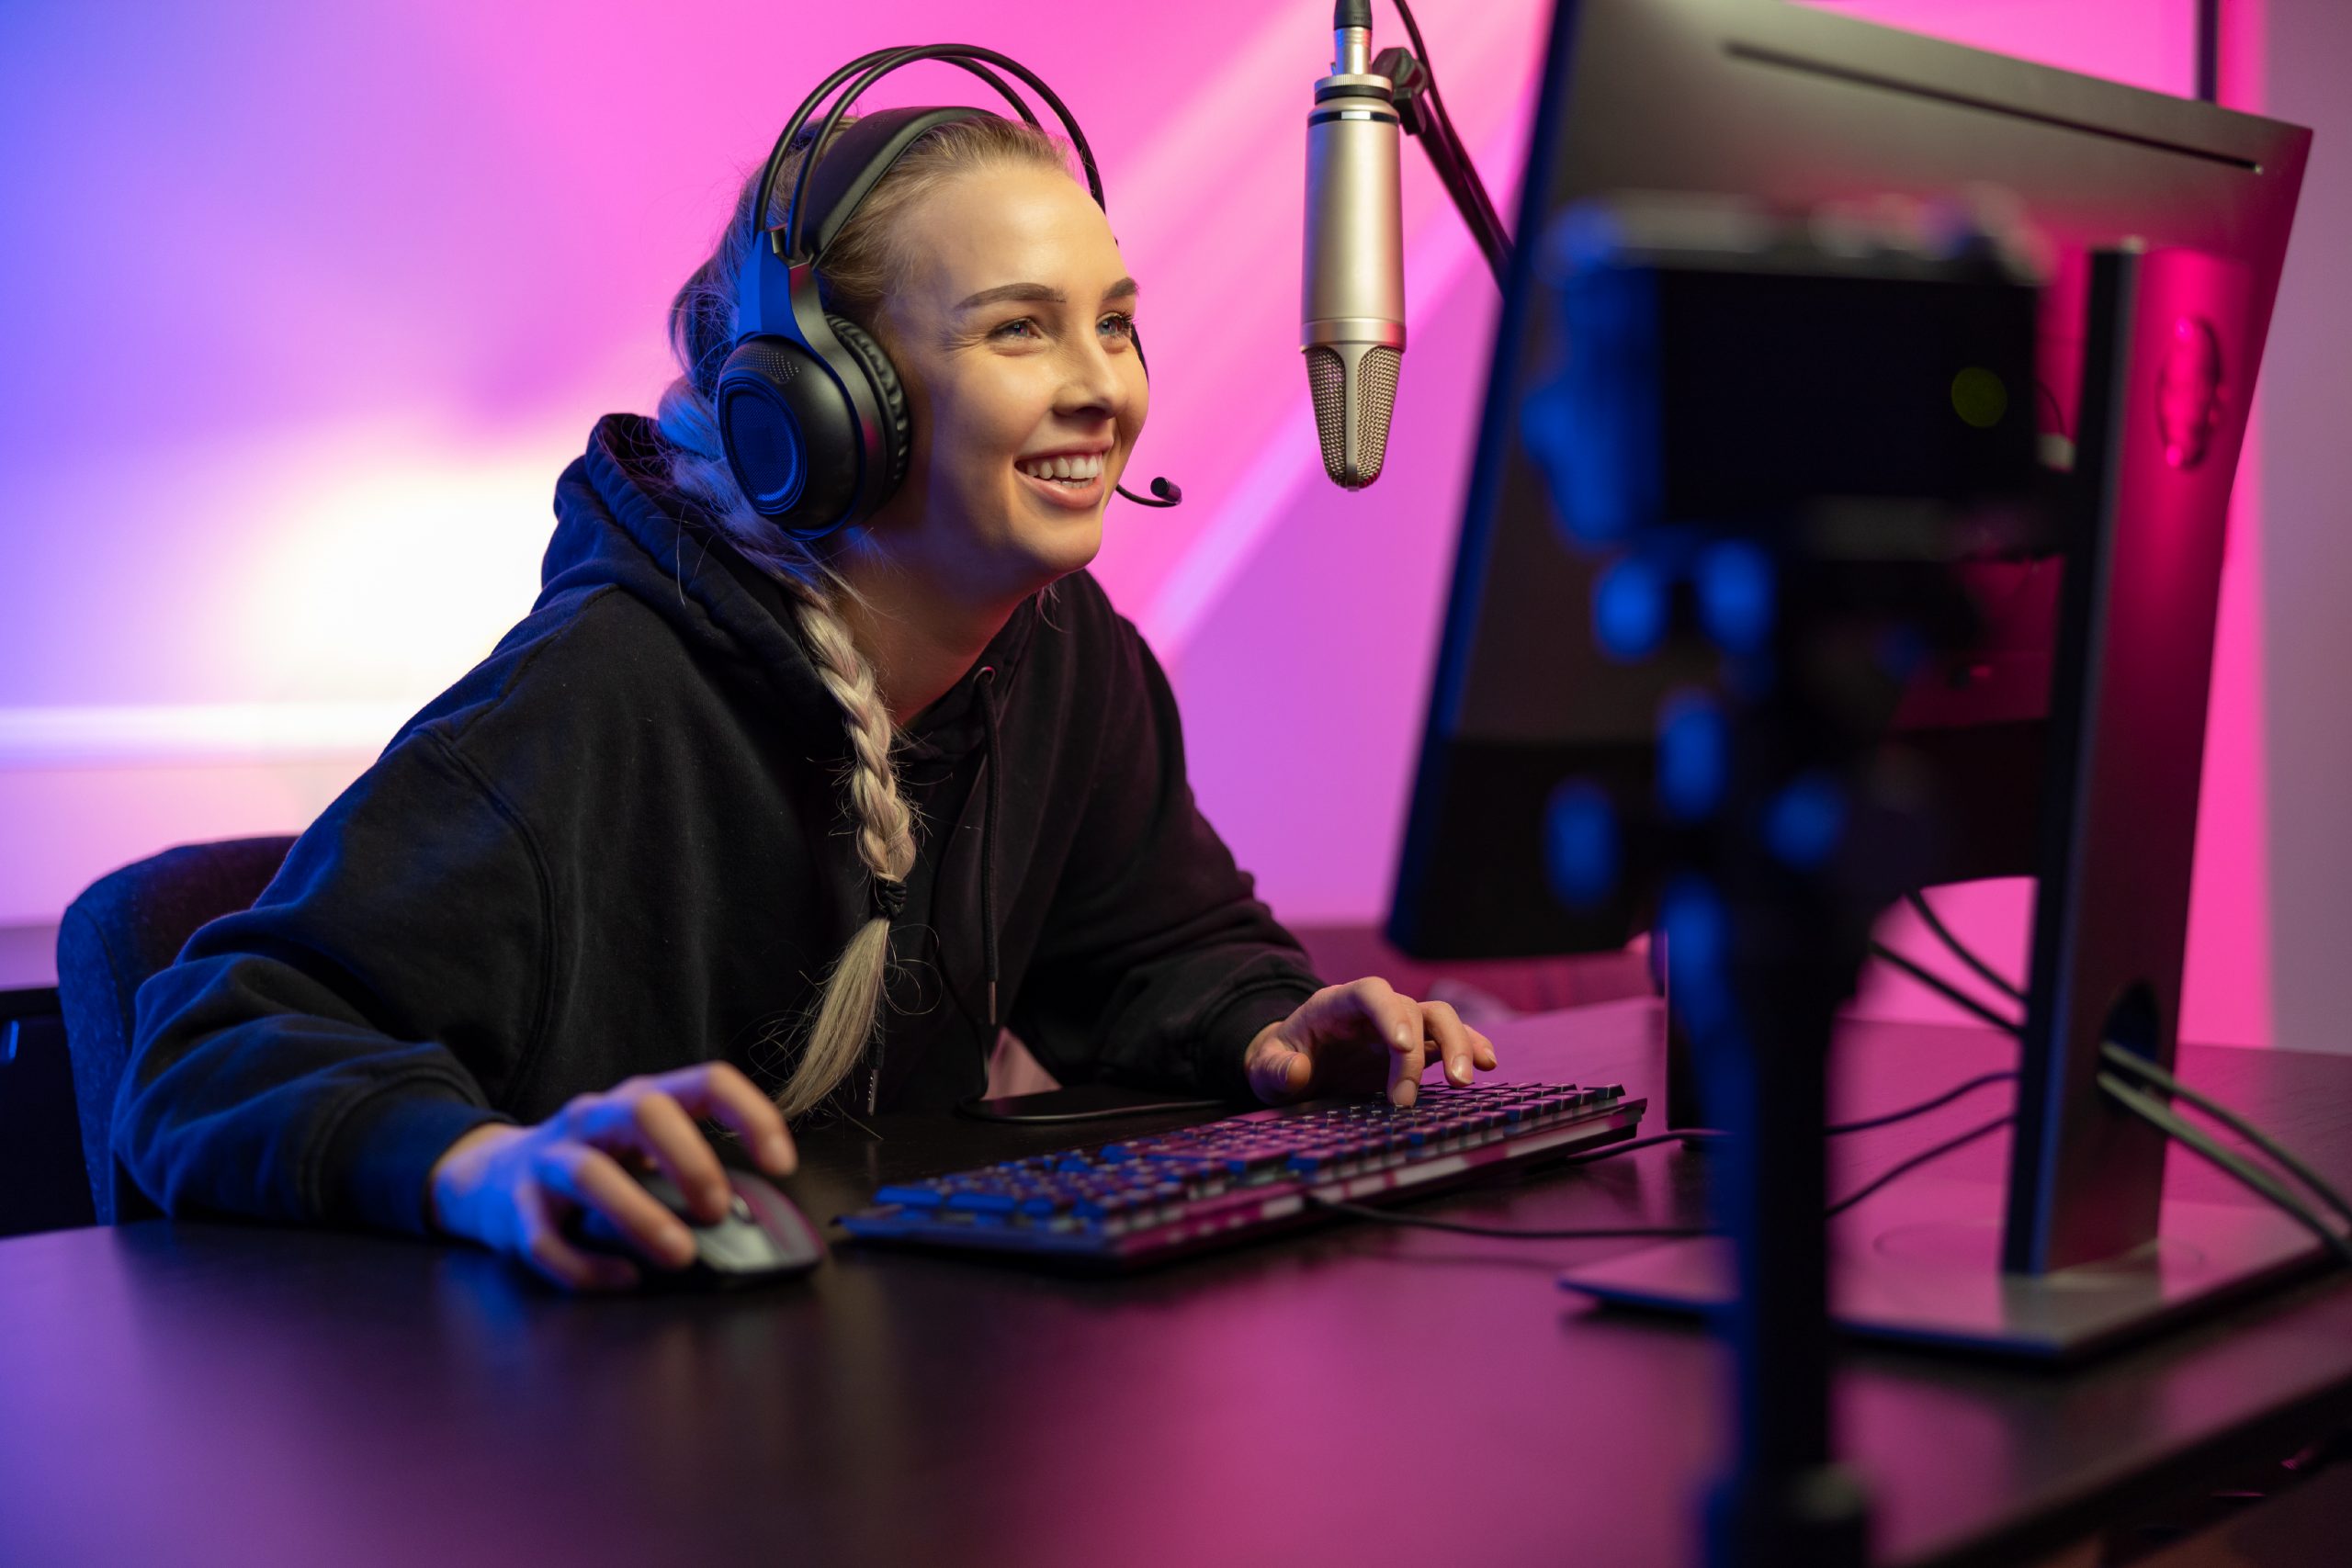 The women who make a living gaming on Twitch, Games